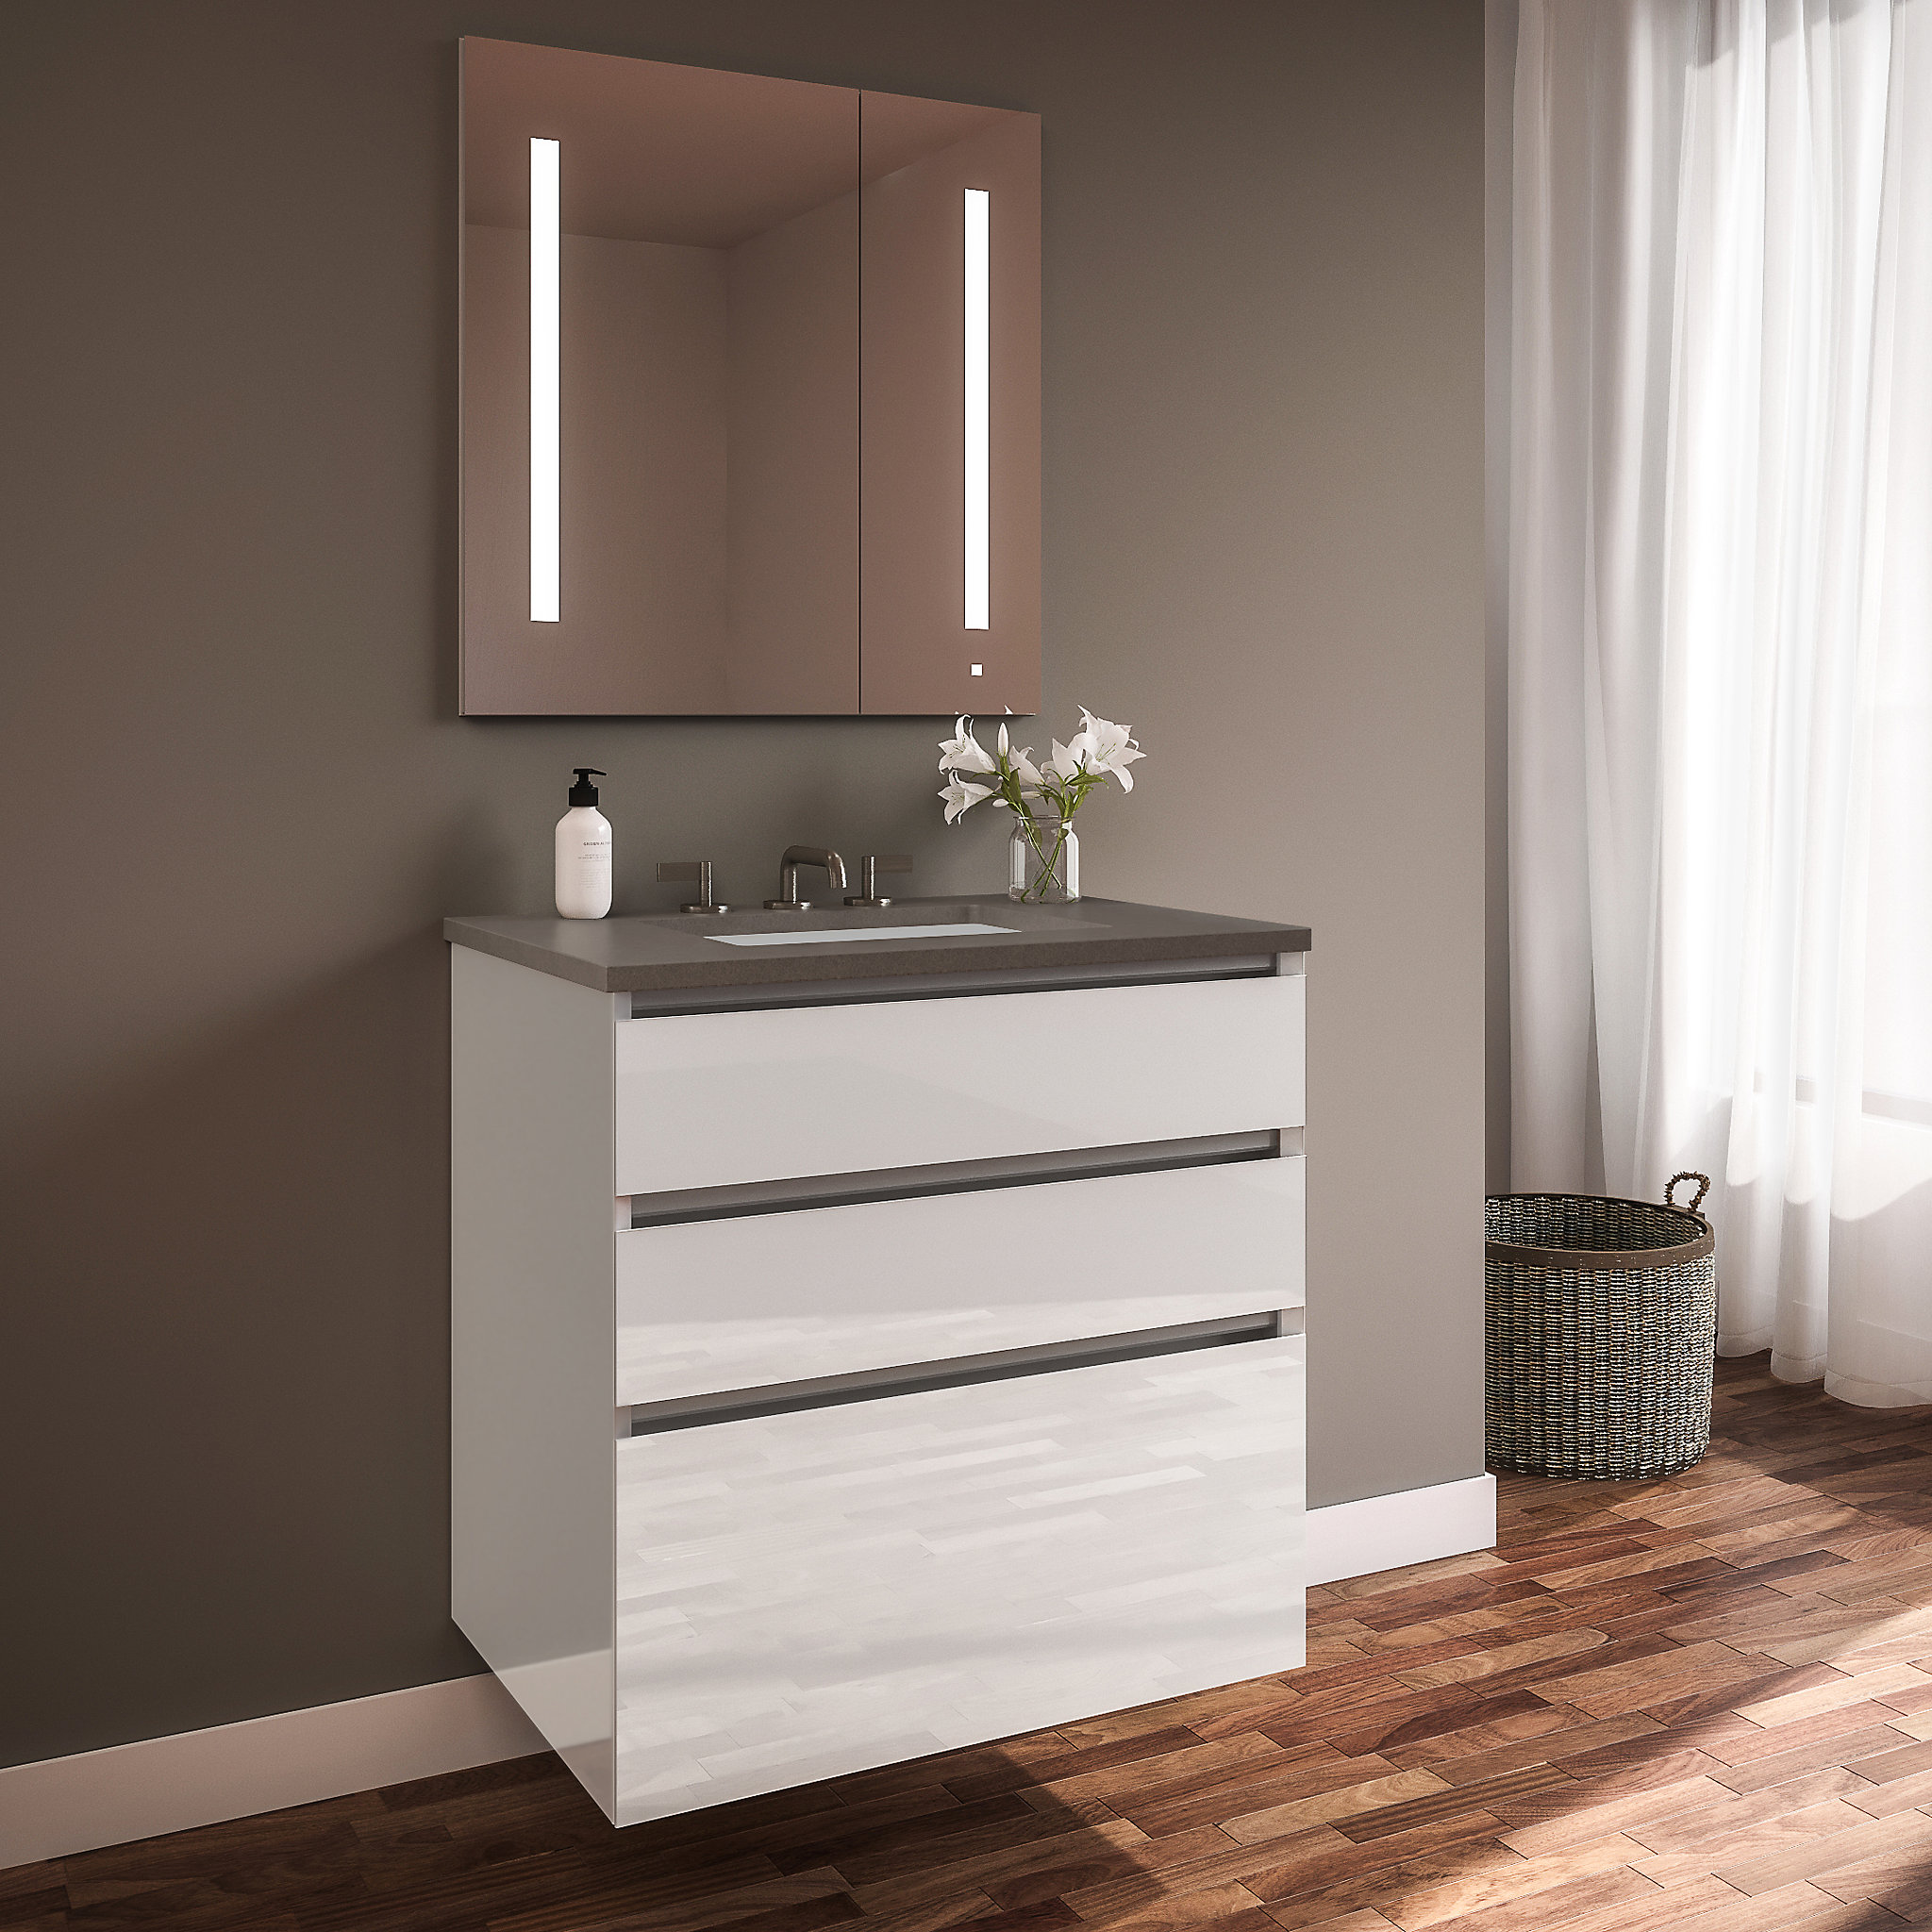 Robern 30219100NB00003 Curated Cartesian Vanity, 30" x 7-1/2" x 21", 24" x 15" x 21", Three Drawer, White Glass, Tip Out Drawer,